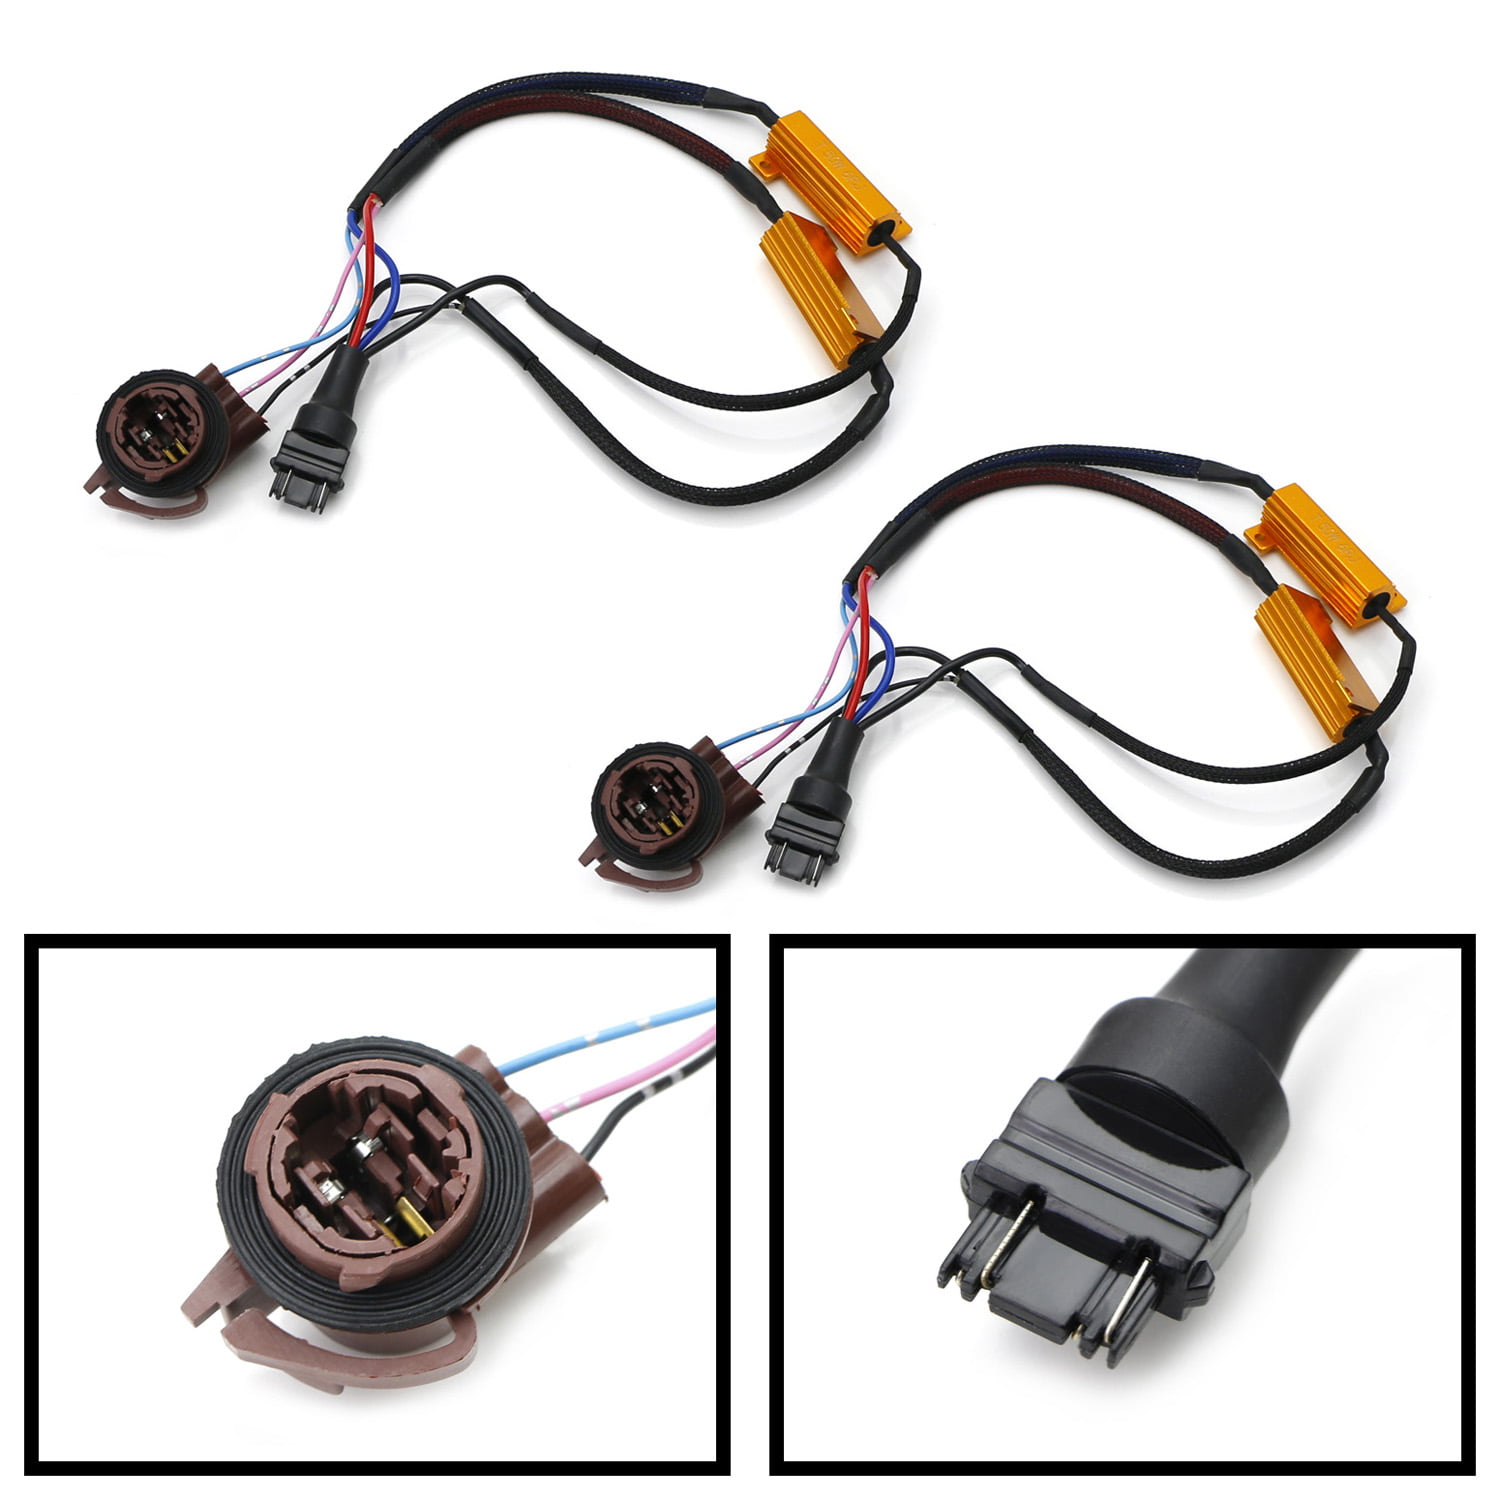 2 Hyper Flash Fix Error Free Wiring Adapters Compatible With 1156 7506 7527 LED Turn Signal Light Bulbs iJDMTOY 